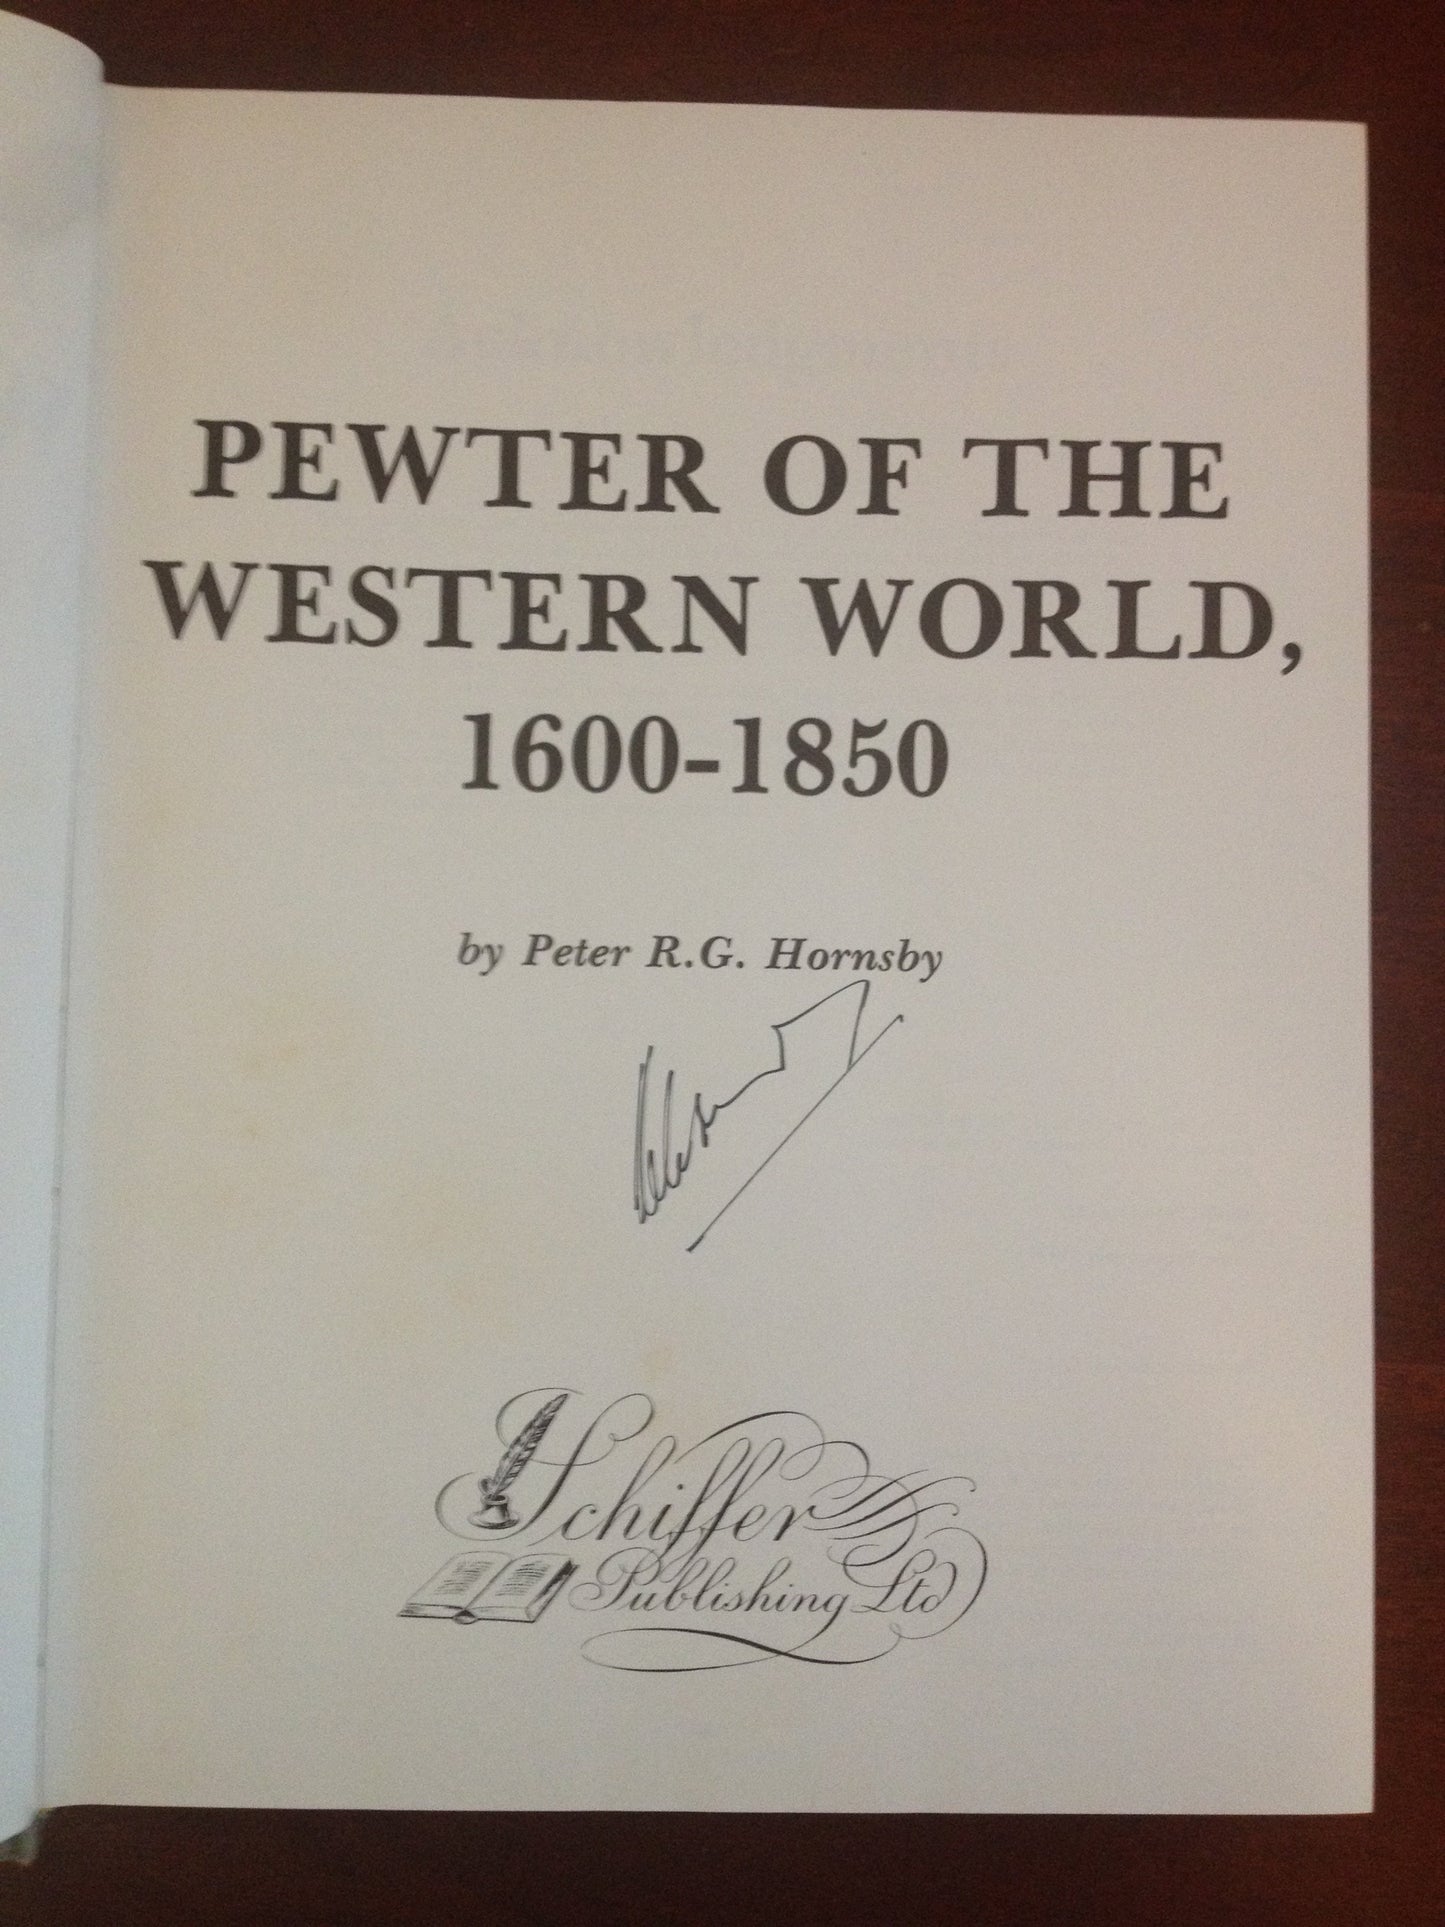 PEWTER OF THE WESTERN WORLD 1600-1850  BY: PETER RG HORNSBY BooksCardsNBikes